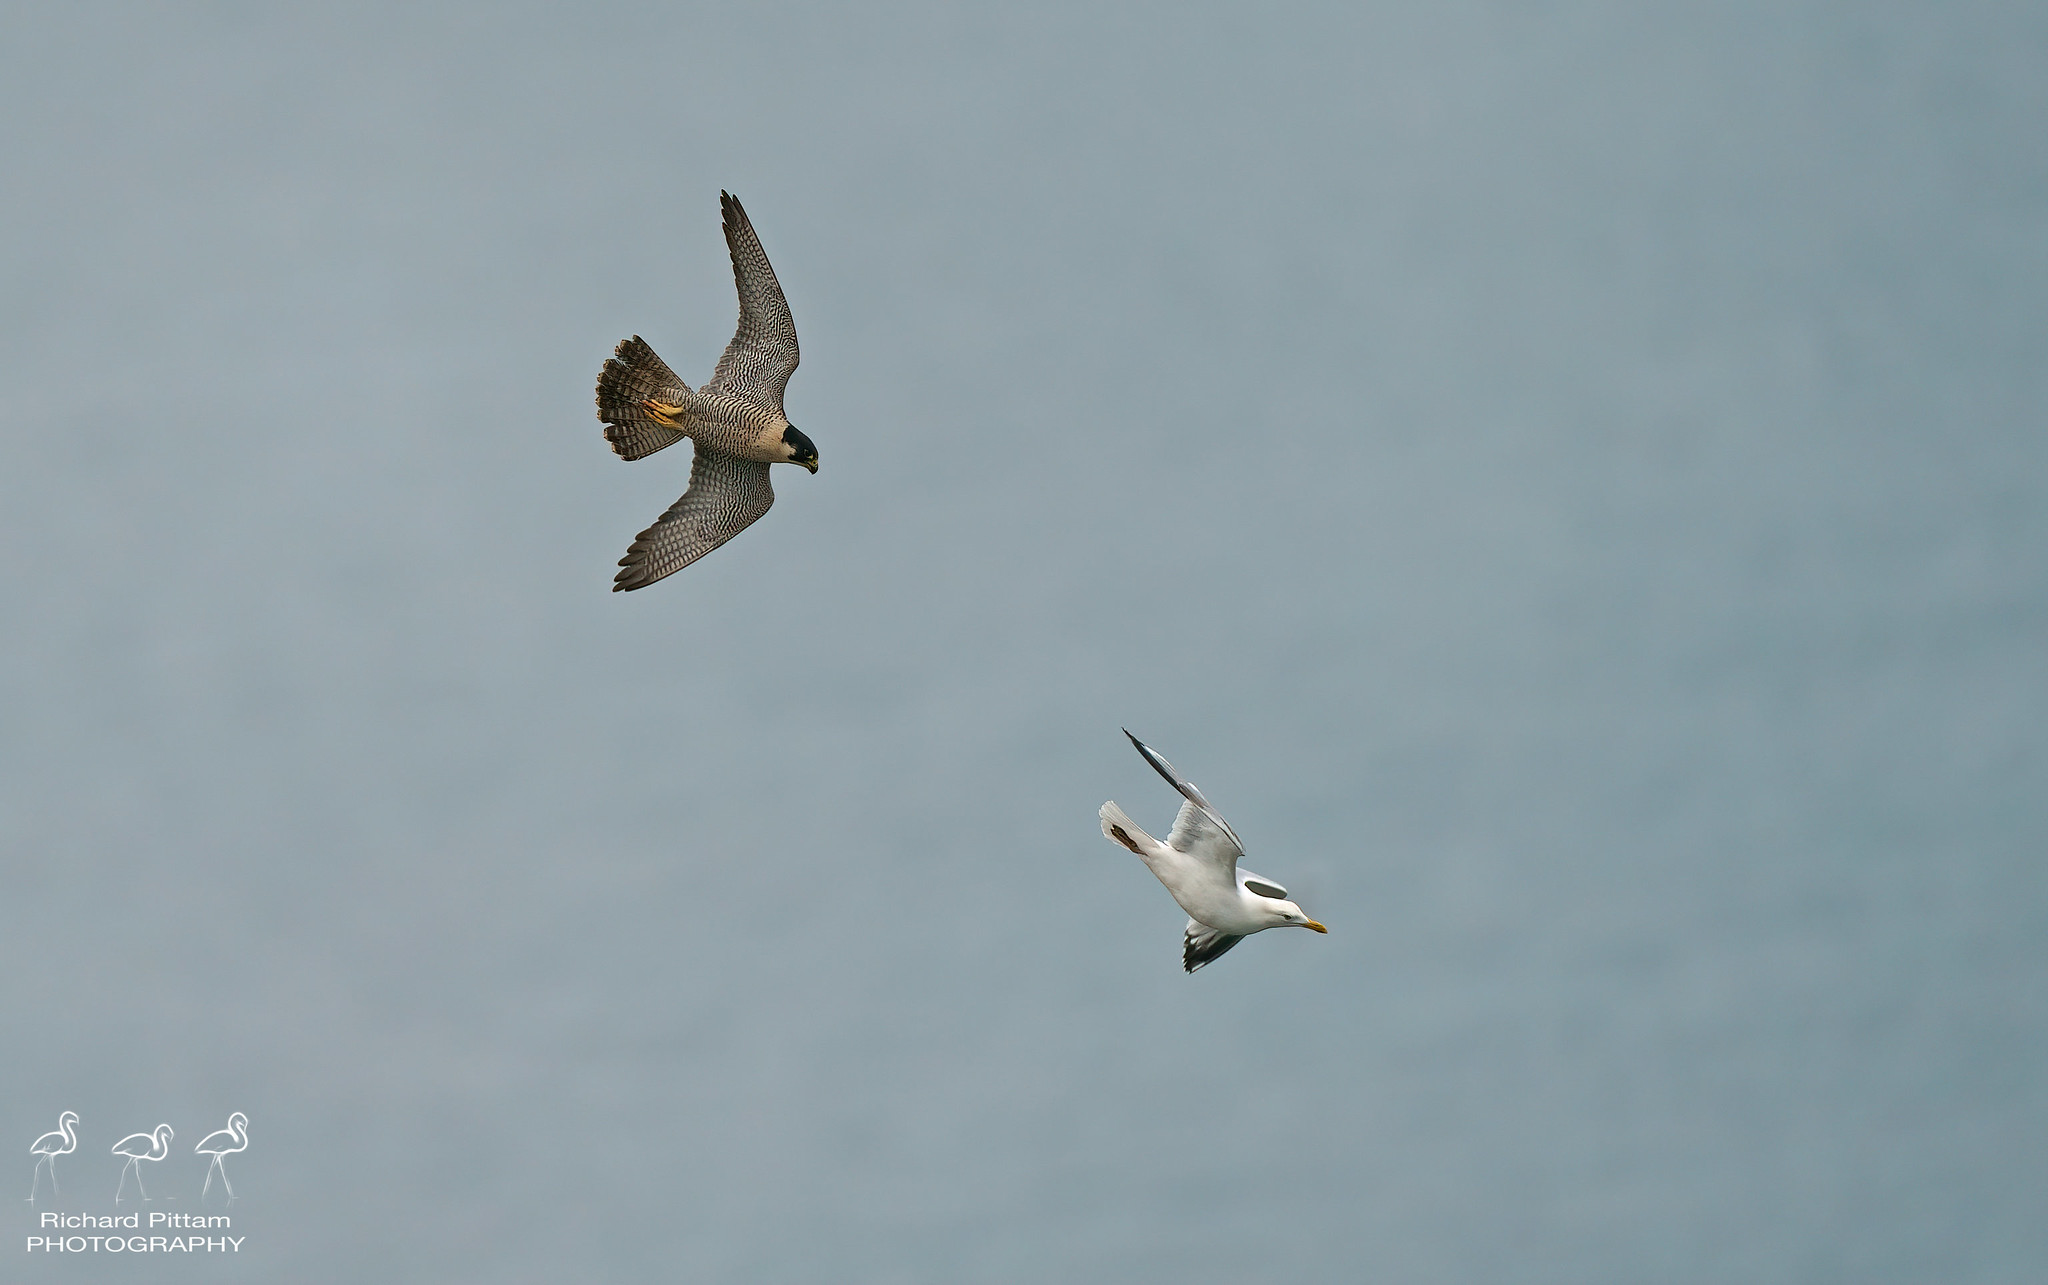 Peregrine and Herring Gull in aerial tussle on cliffs